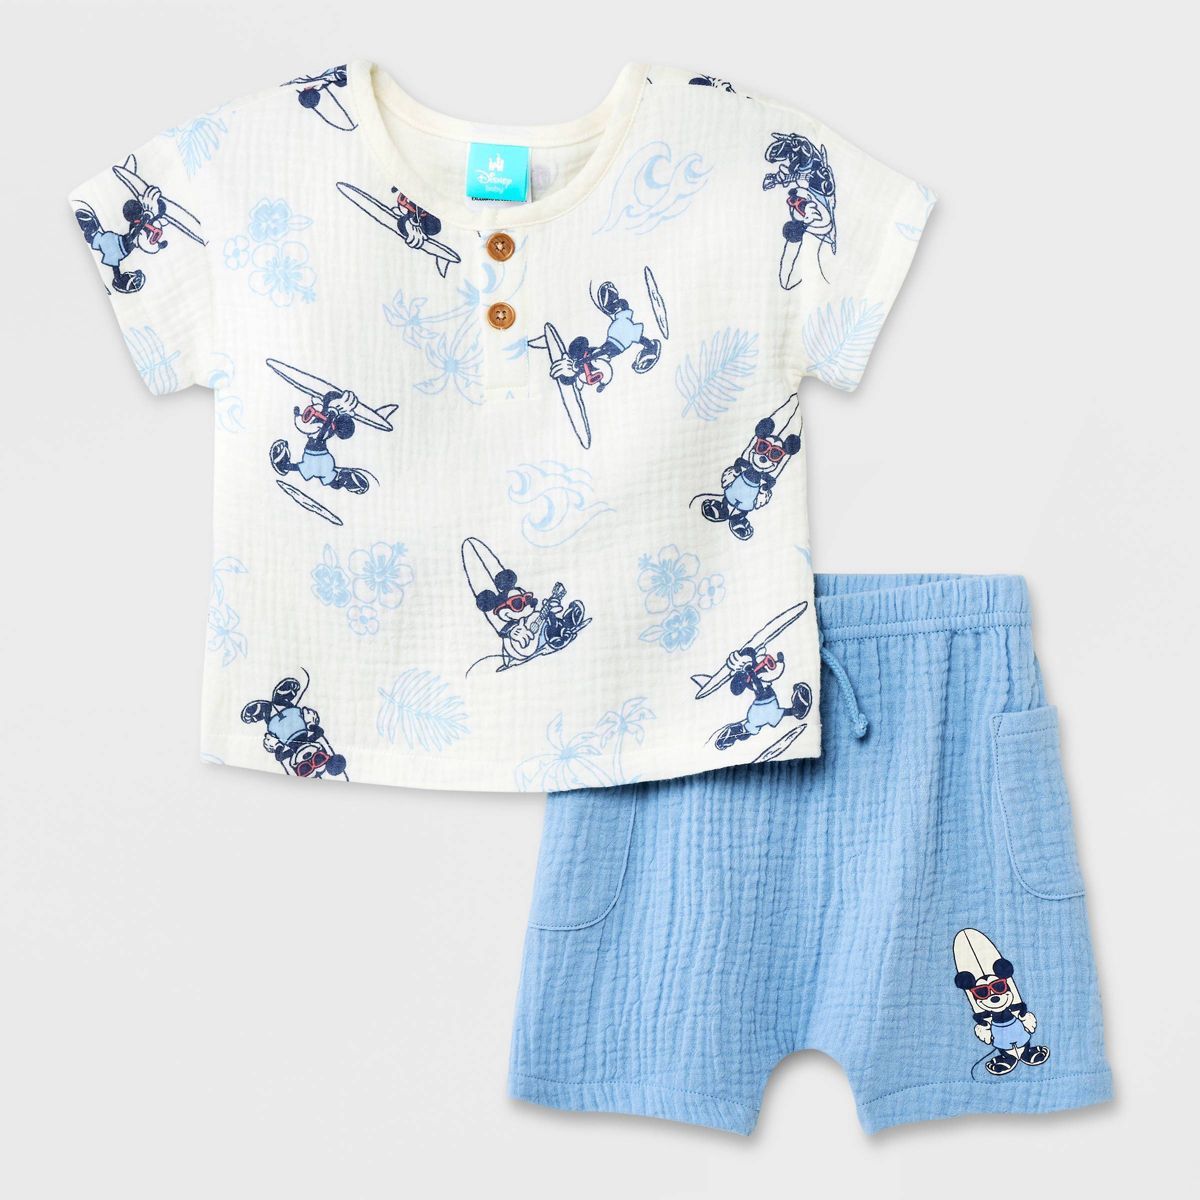 Baby Boys' Disney Mickey Mouse Top and Bottom Set - Blue | Target